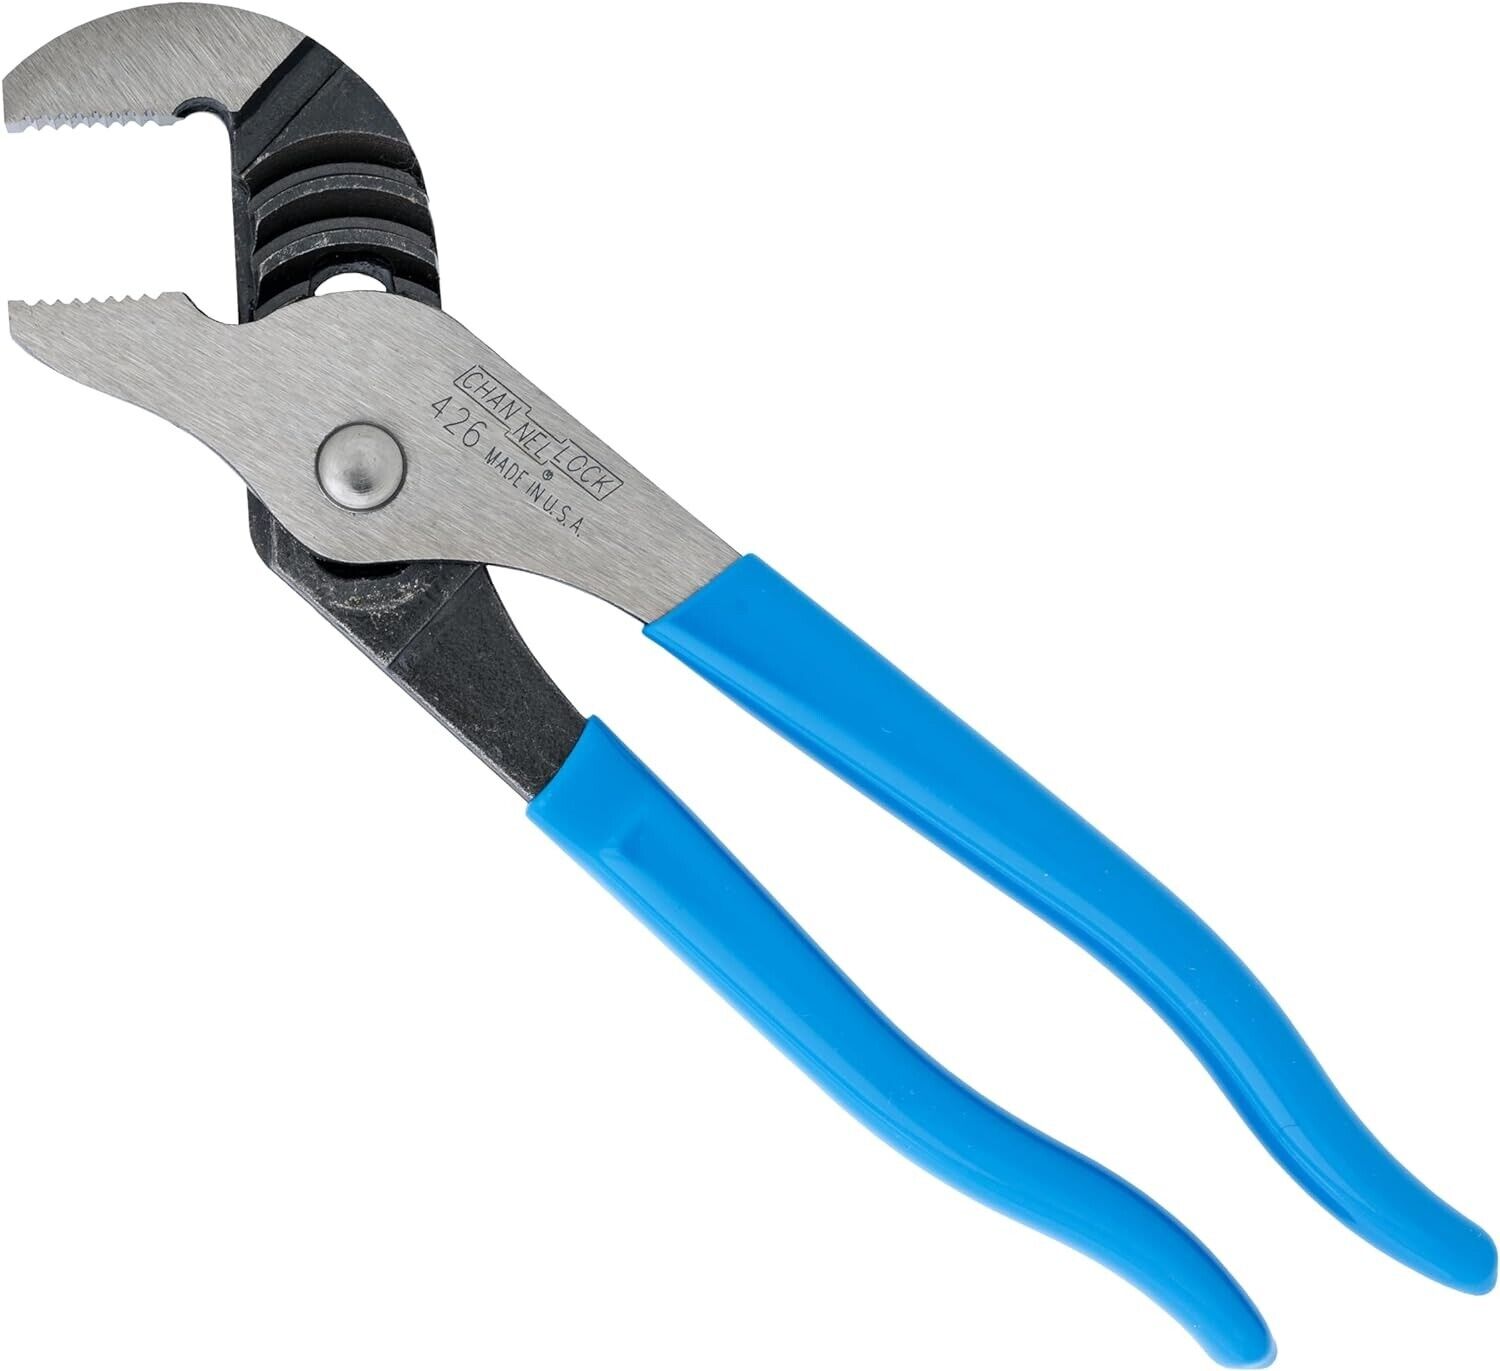 Channellock 426 6.5-Inch Straight Jaw Tongue&Groove Pliers|Groove Joint Plier